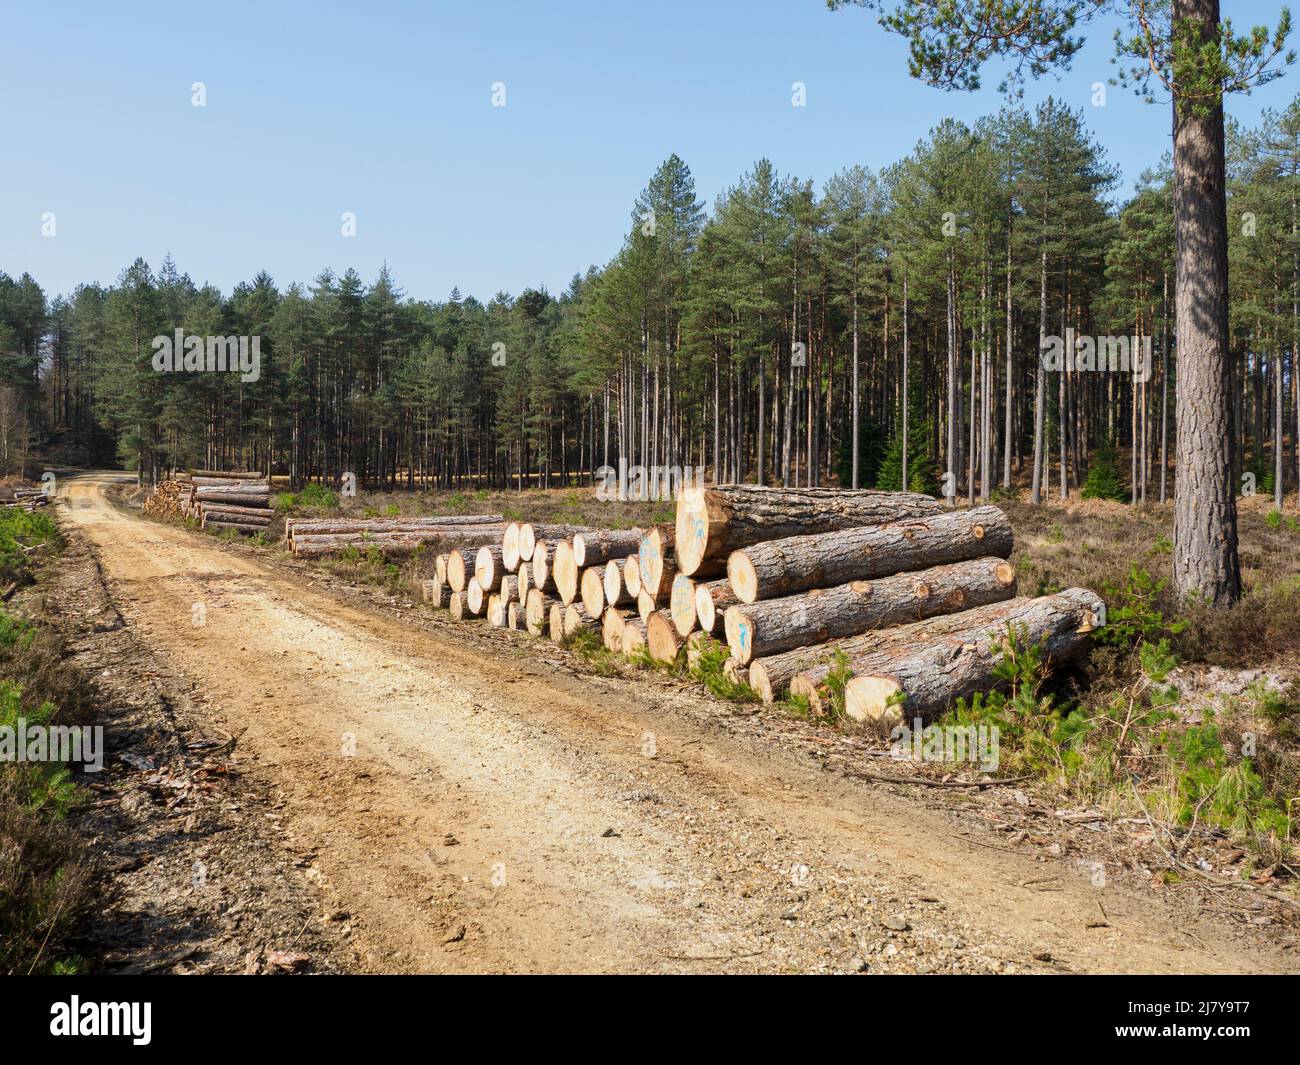 Forestry road, The New Forest, Hampshire, UK Stock Photo